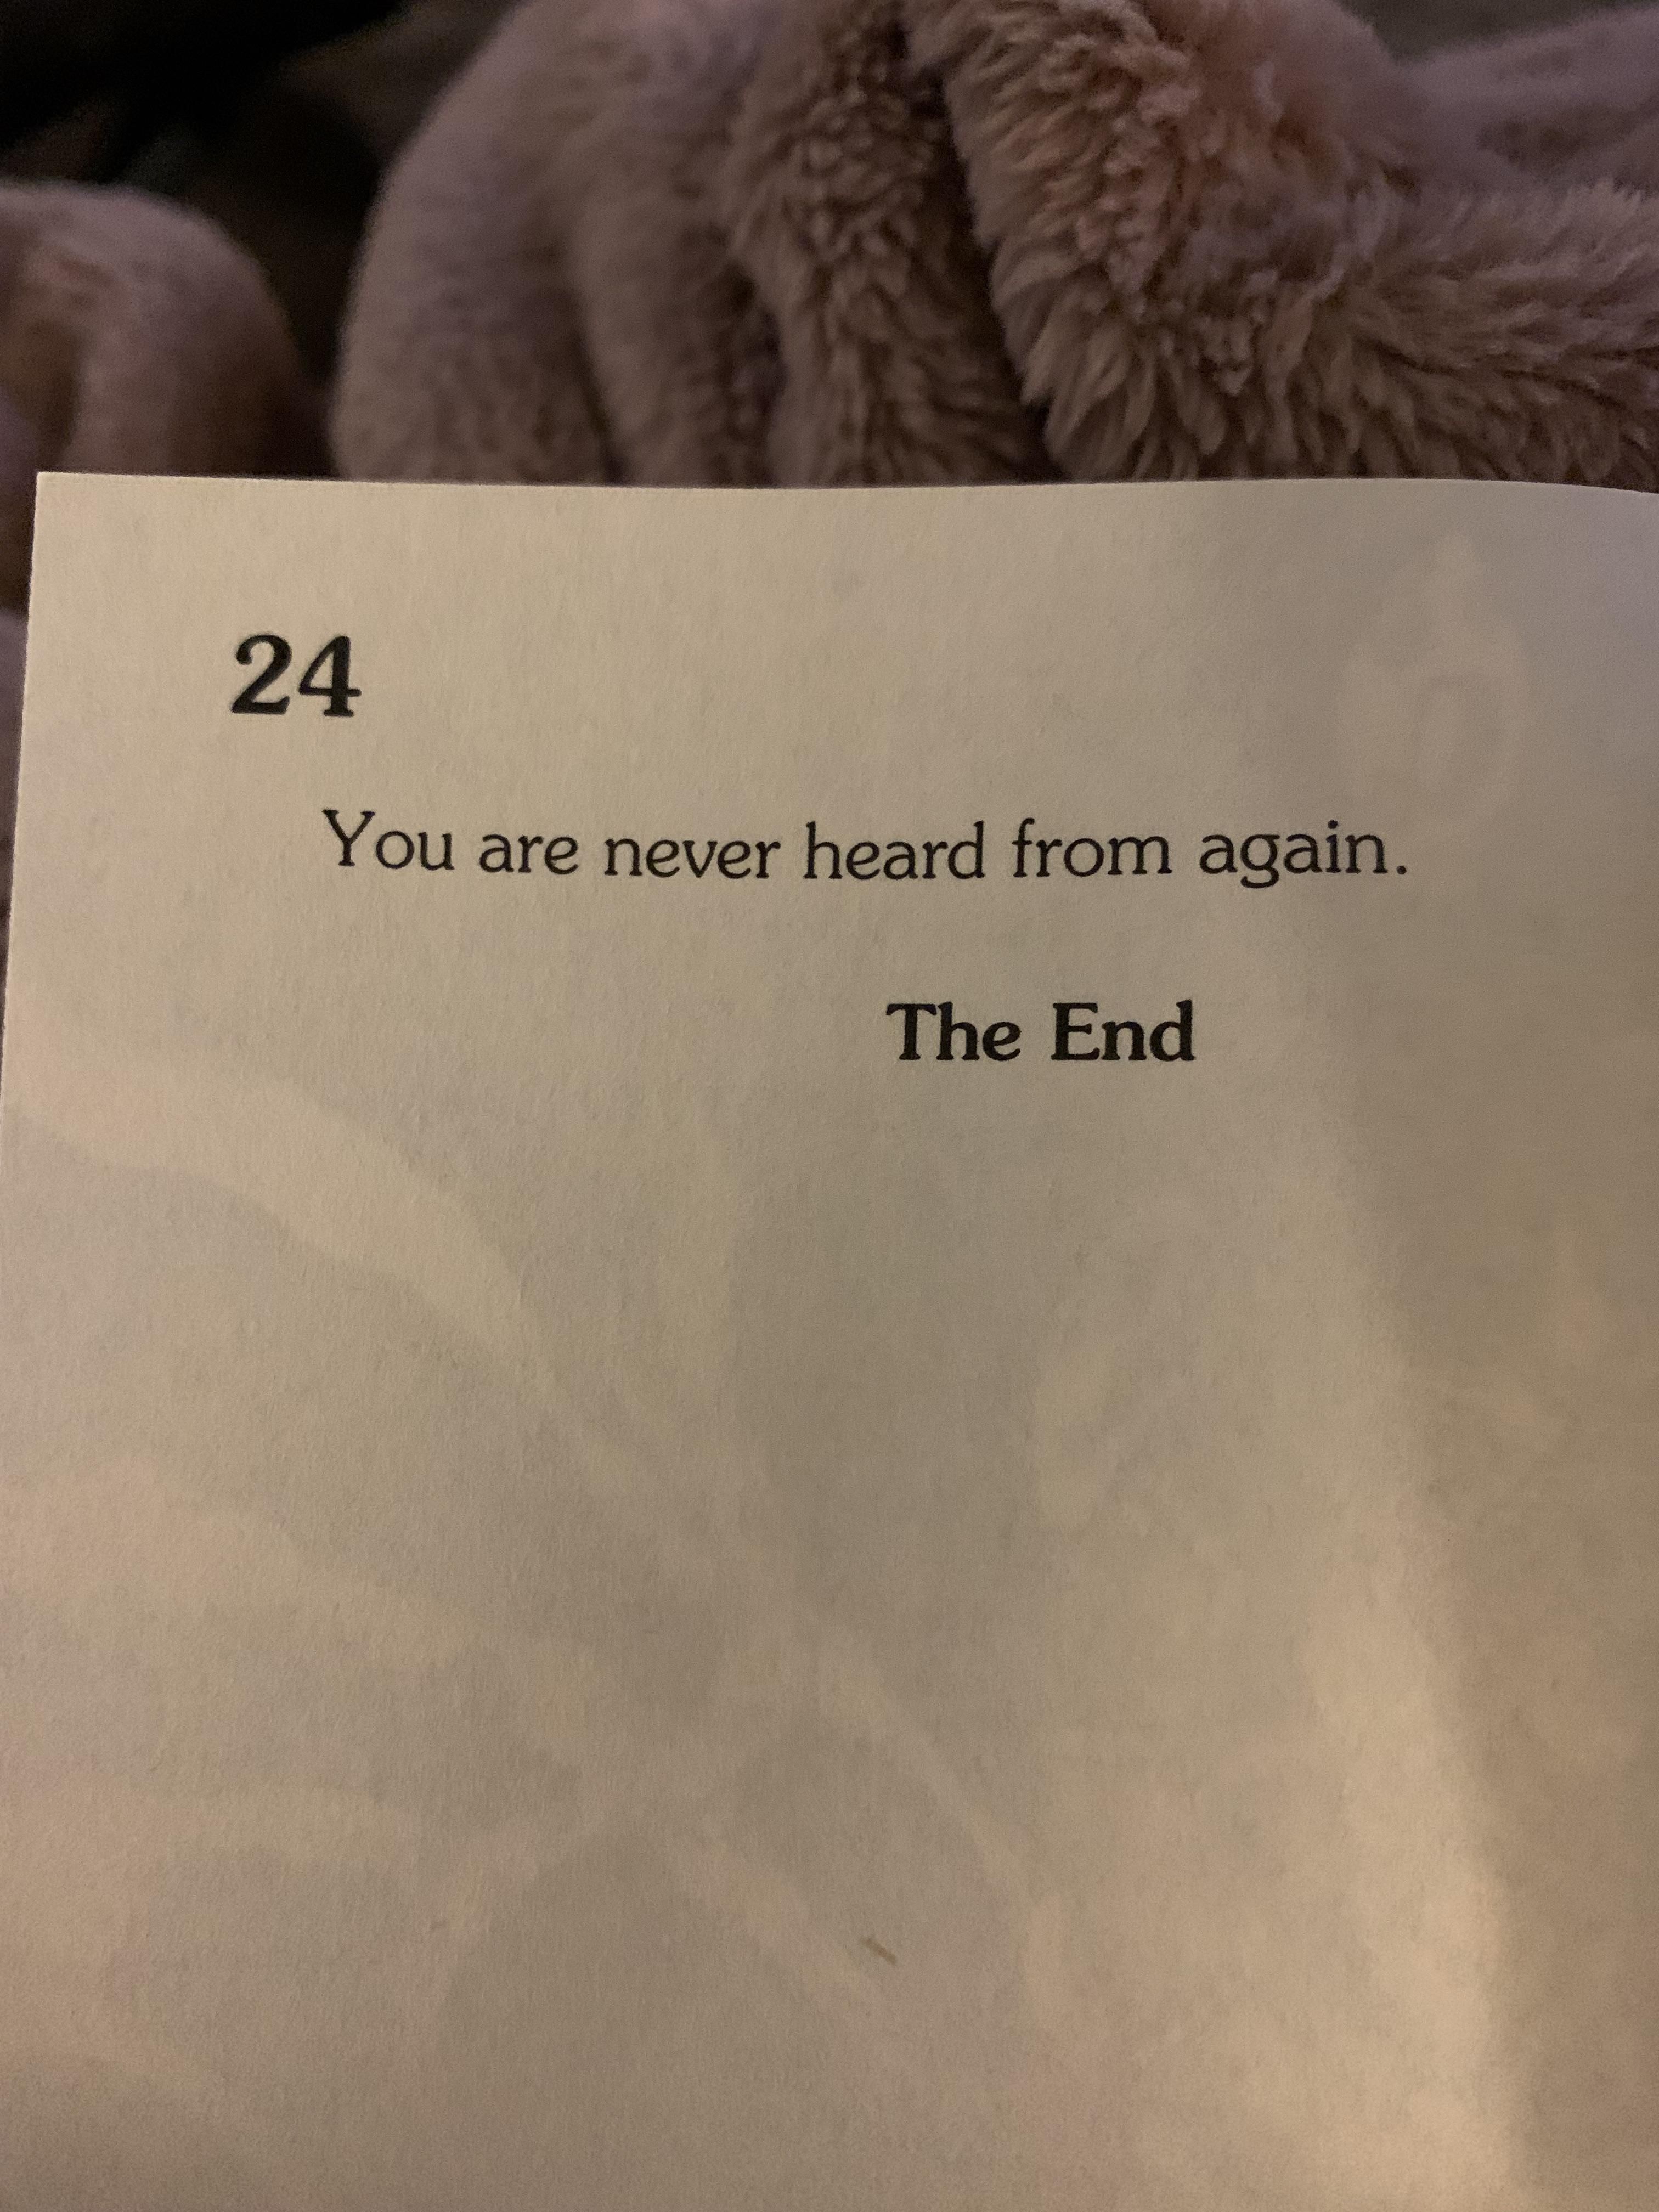 I bought a “Choose your own Adventure” book.